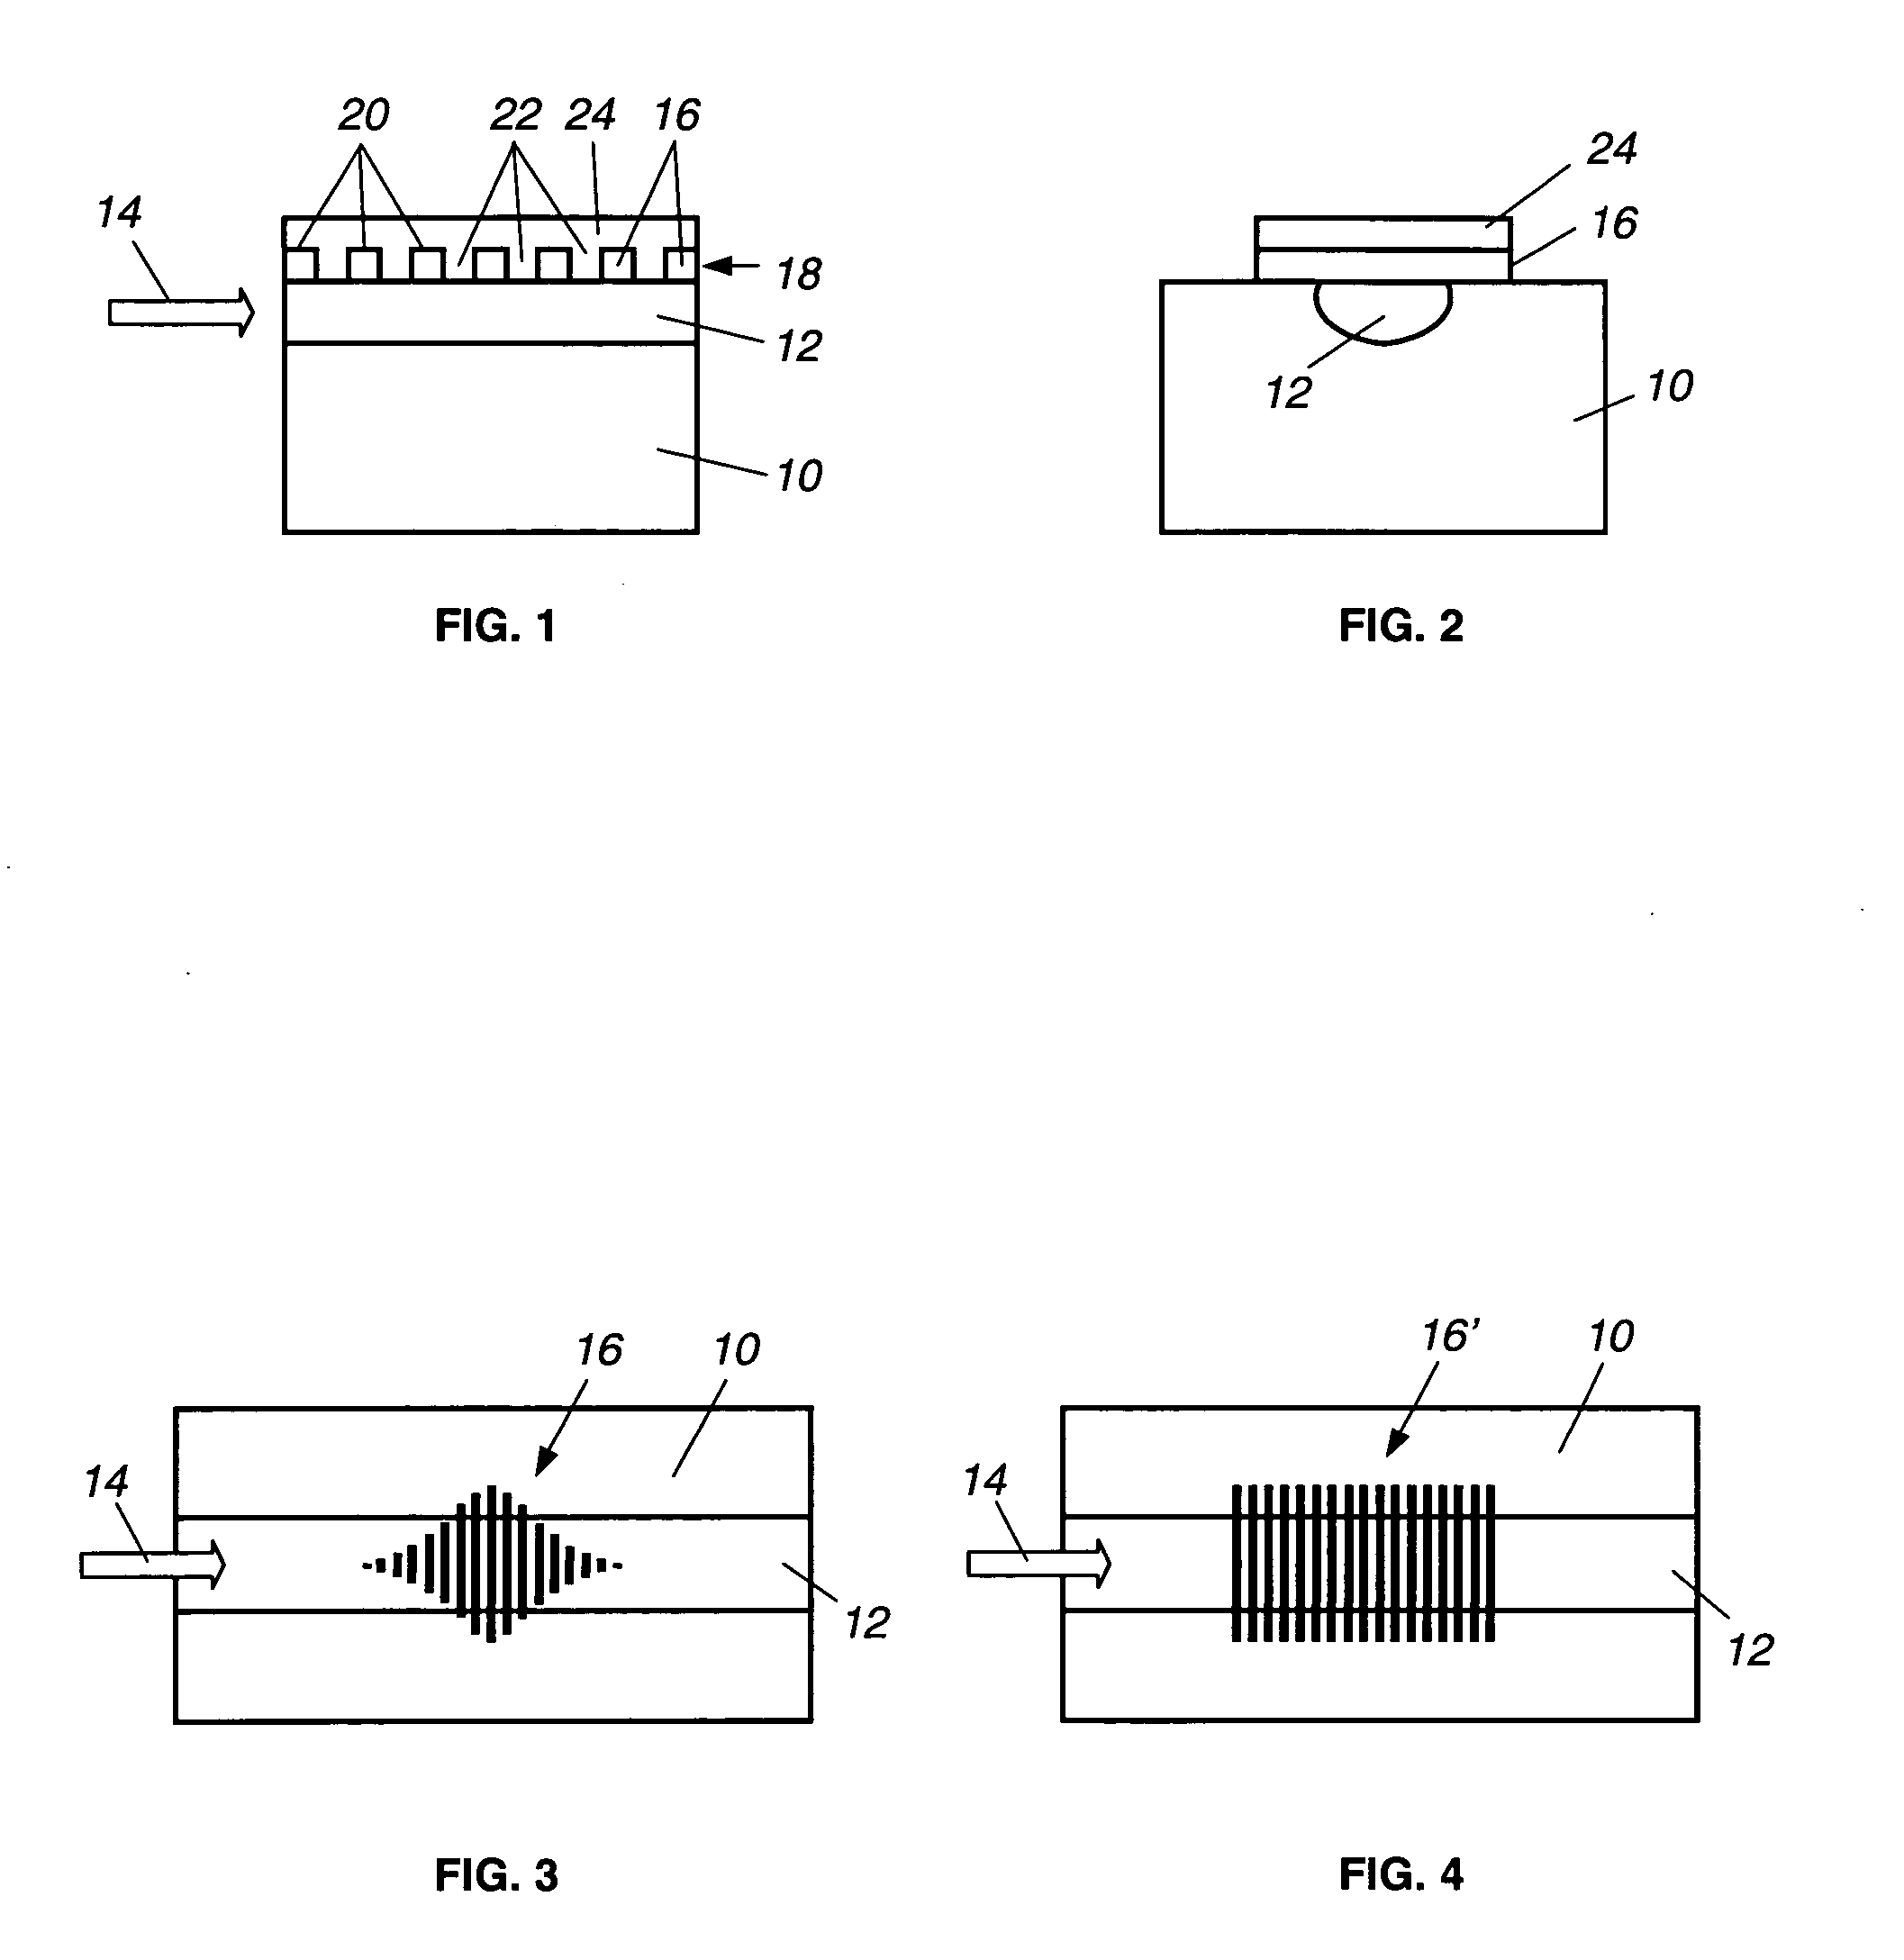 Grating apodization technique for diffused optical waveguides